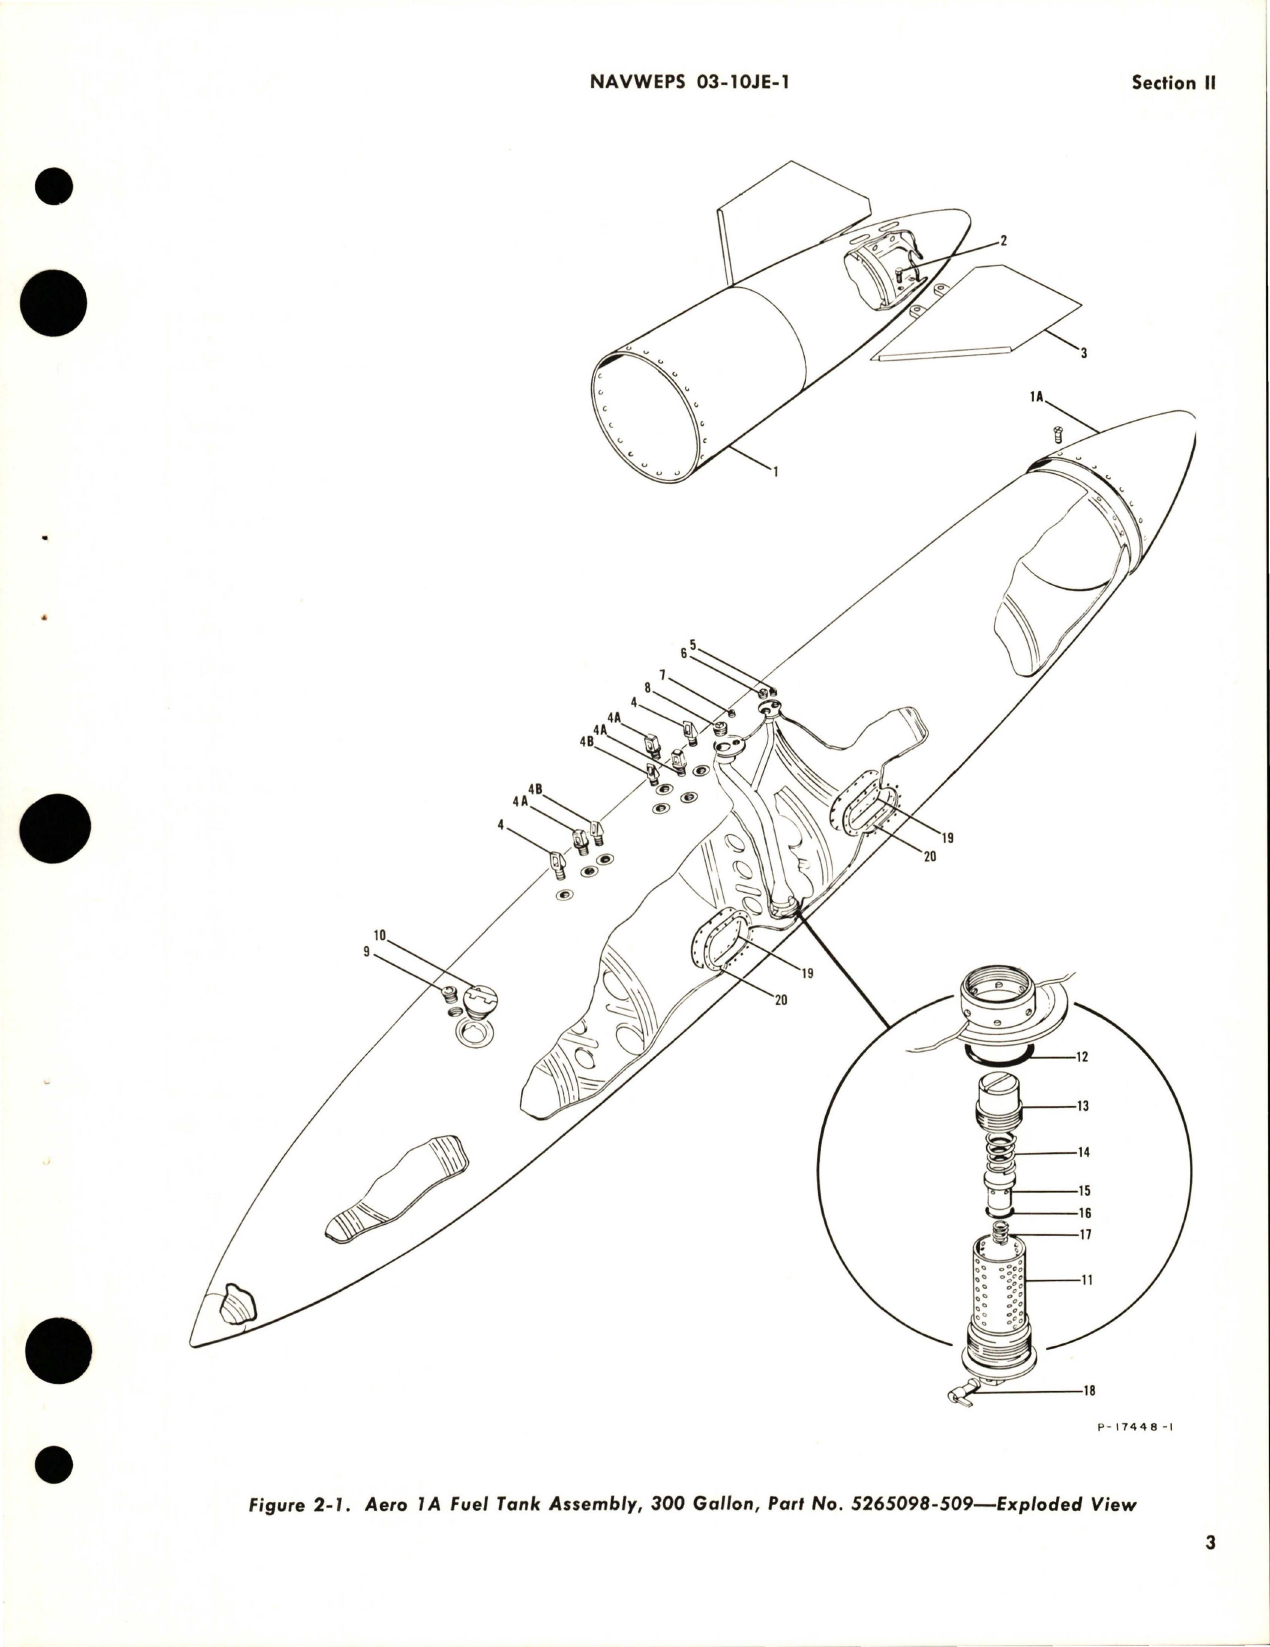 Sample page 7 from AirCorps Library document: Overhaul Instructions for Fuel Tank Assembly - 300 Gallon